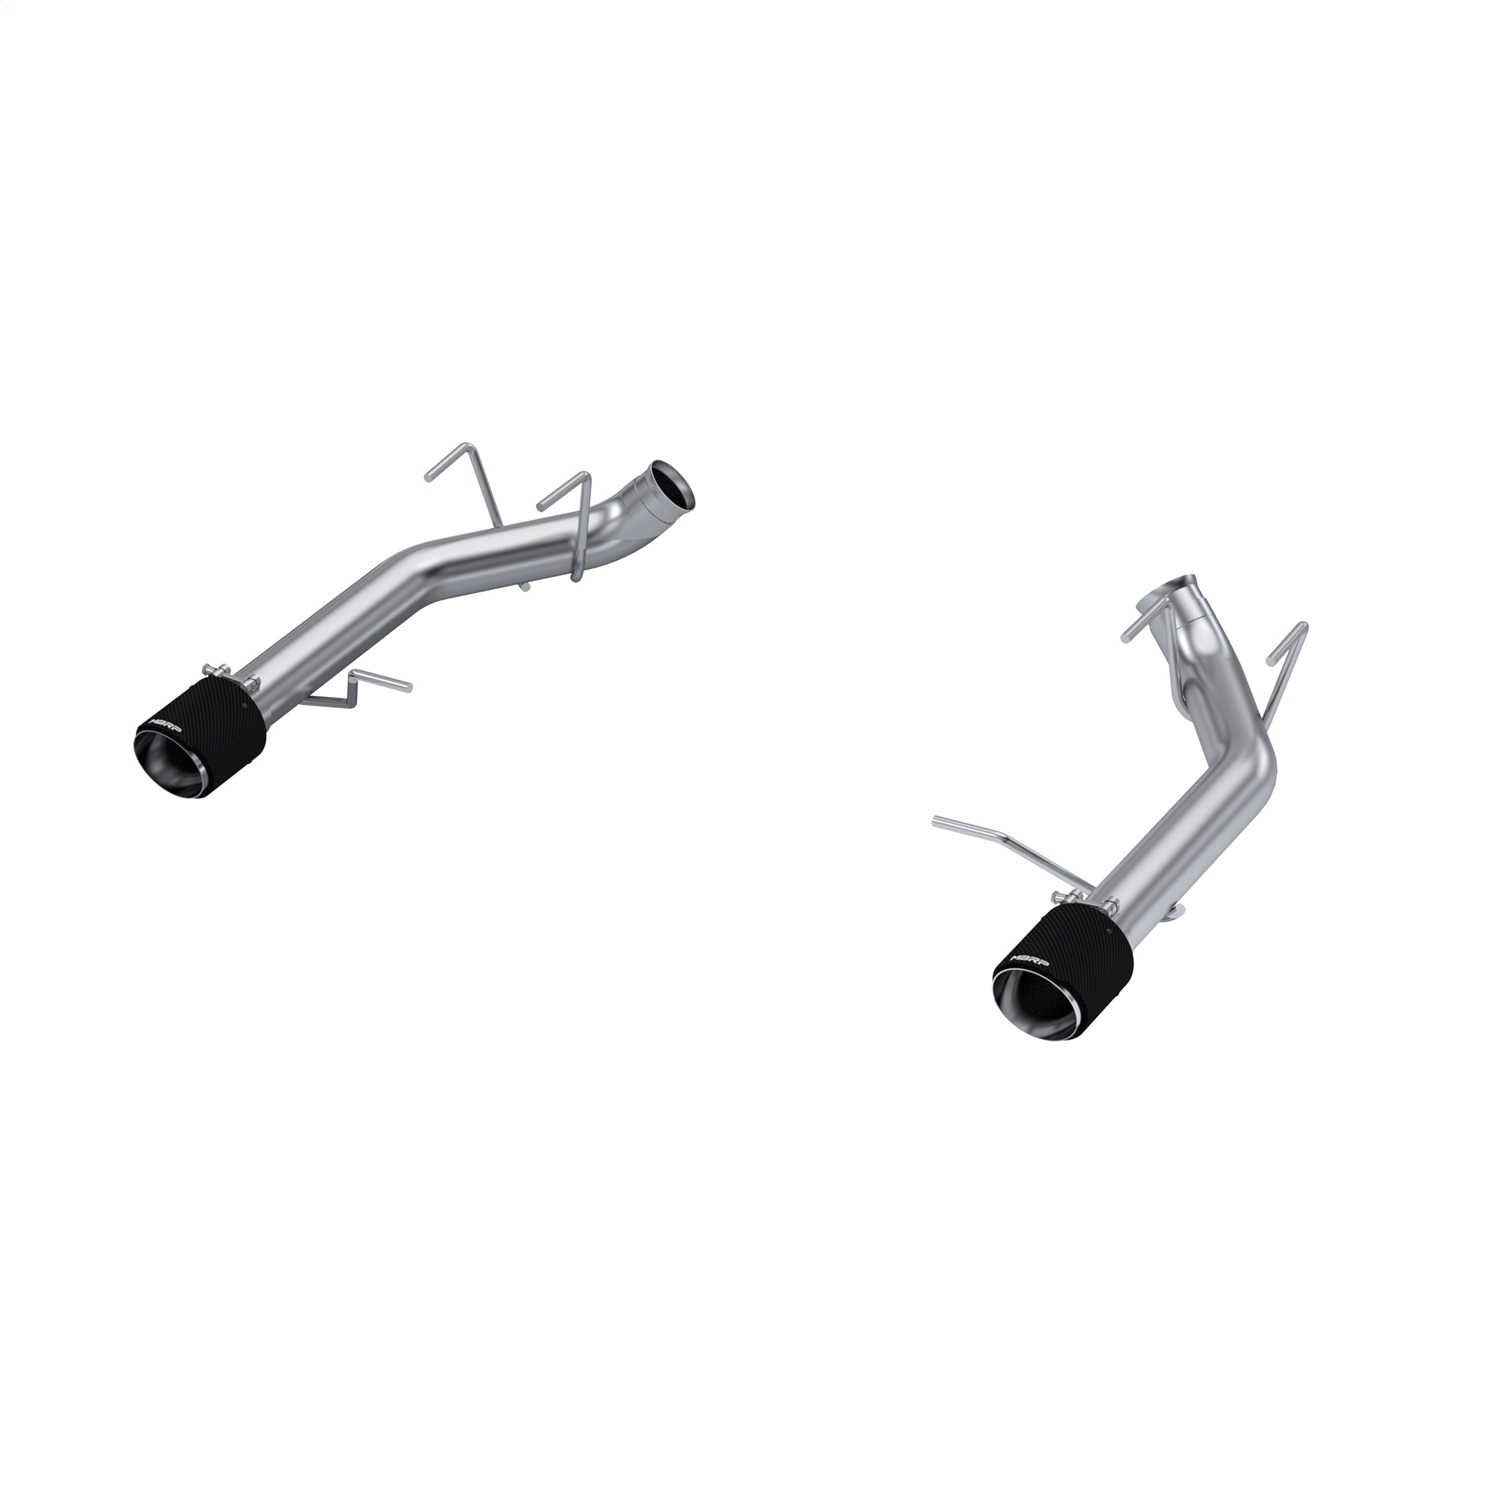 MBRP Exhaust S72033CF Armor Pro Axle Back Exhaust System Fits 11-14 Mustang